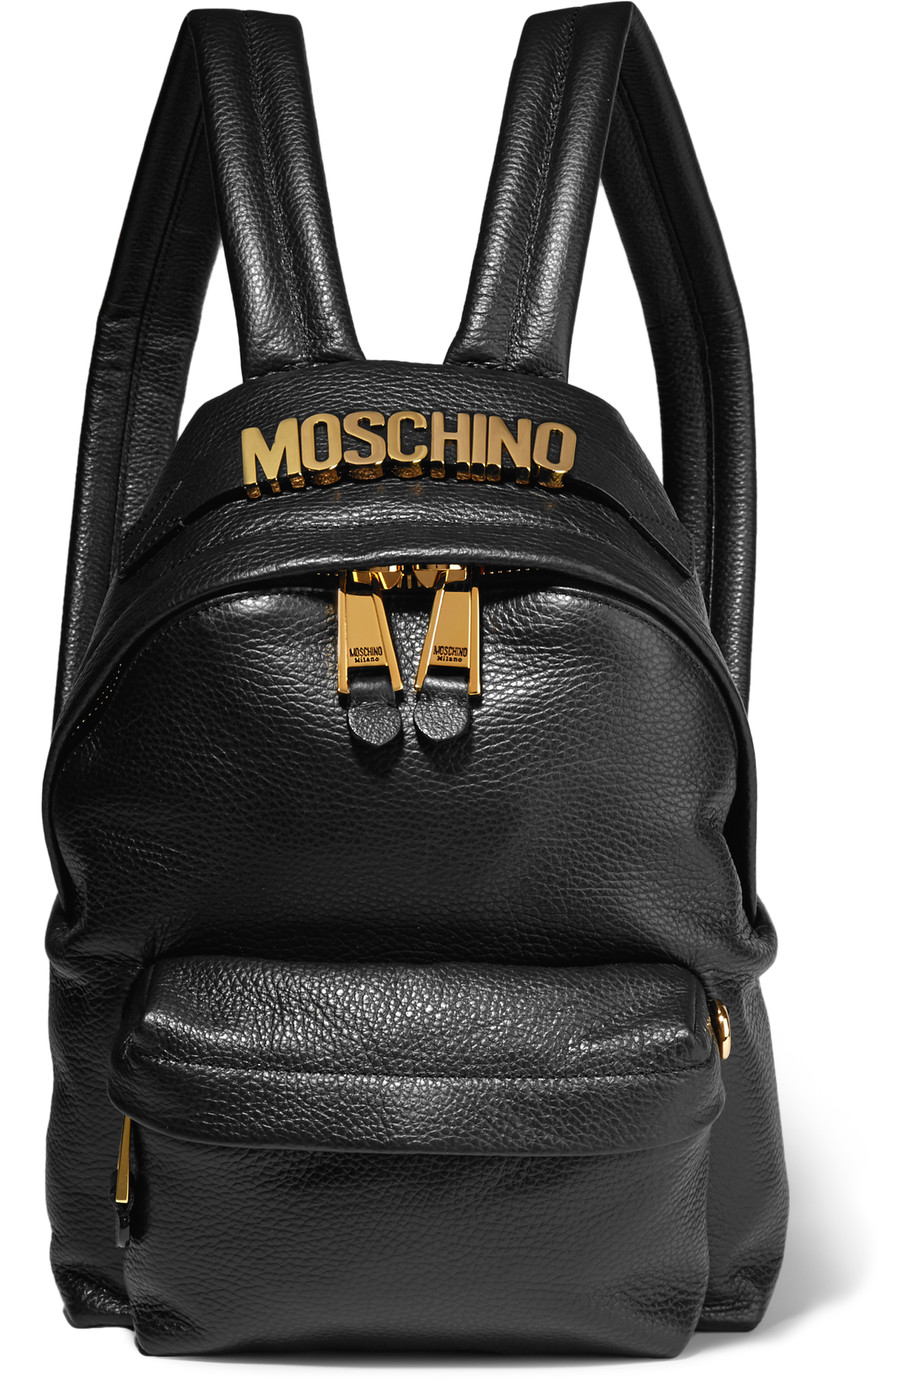 Moschino Embellished Textured-leather Backpack | ModeSens